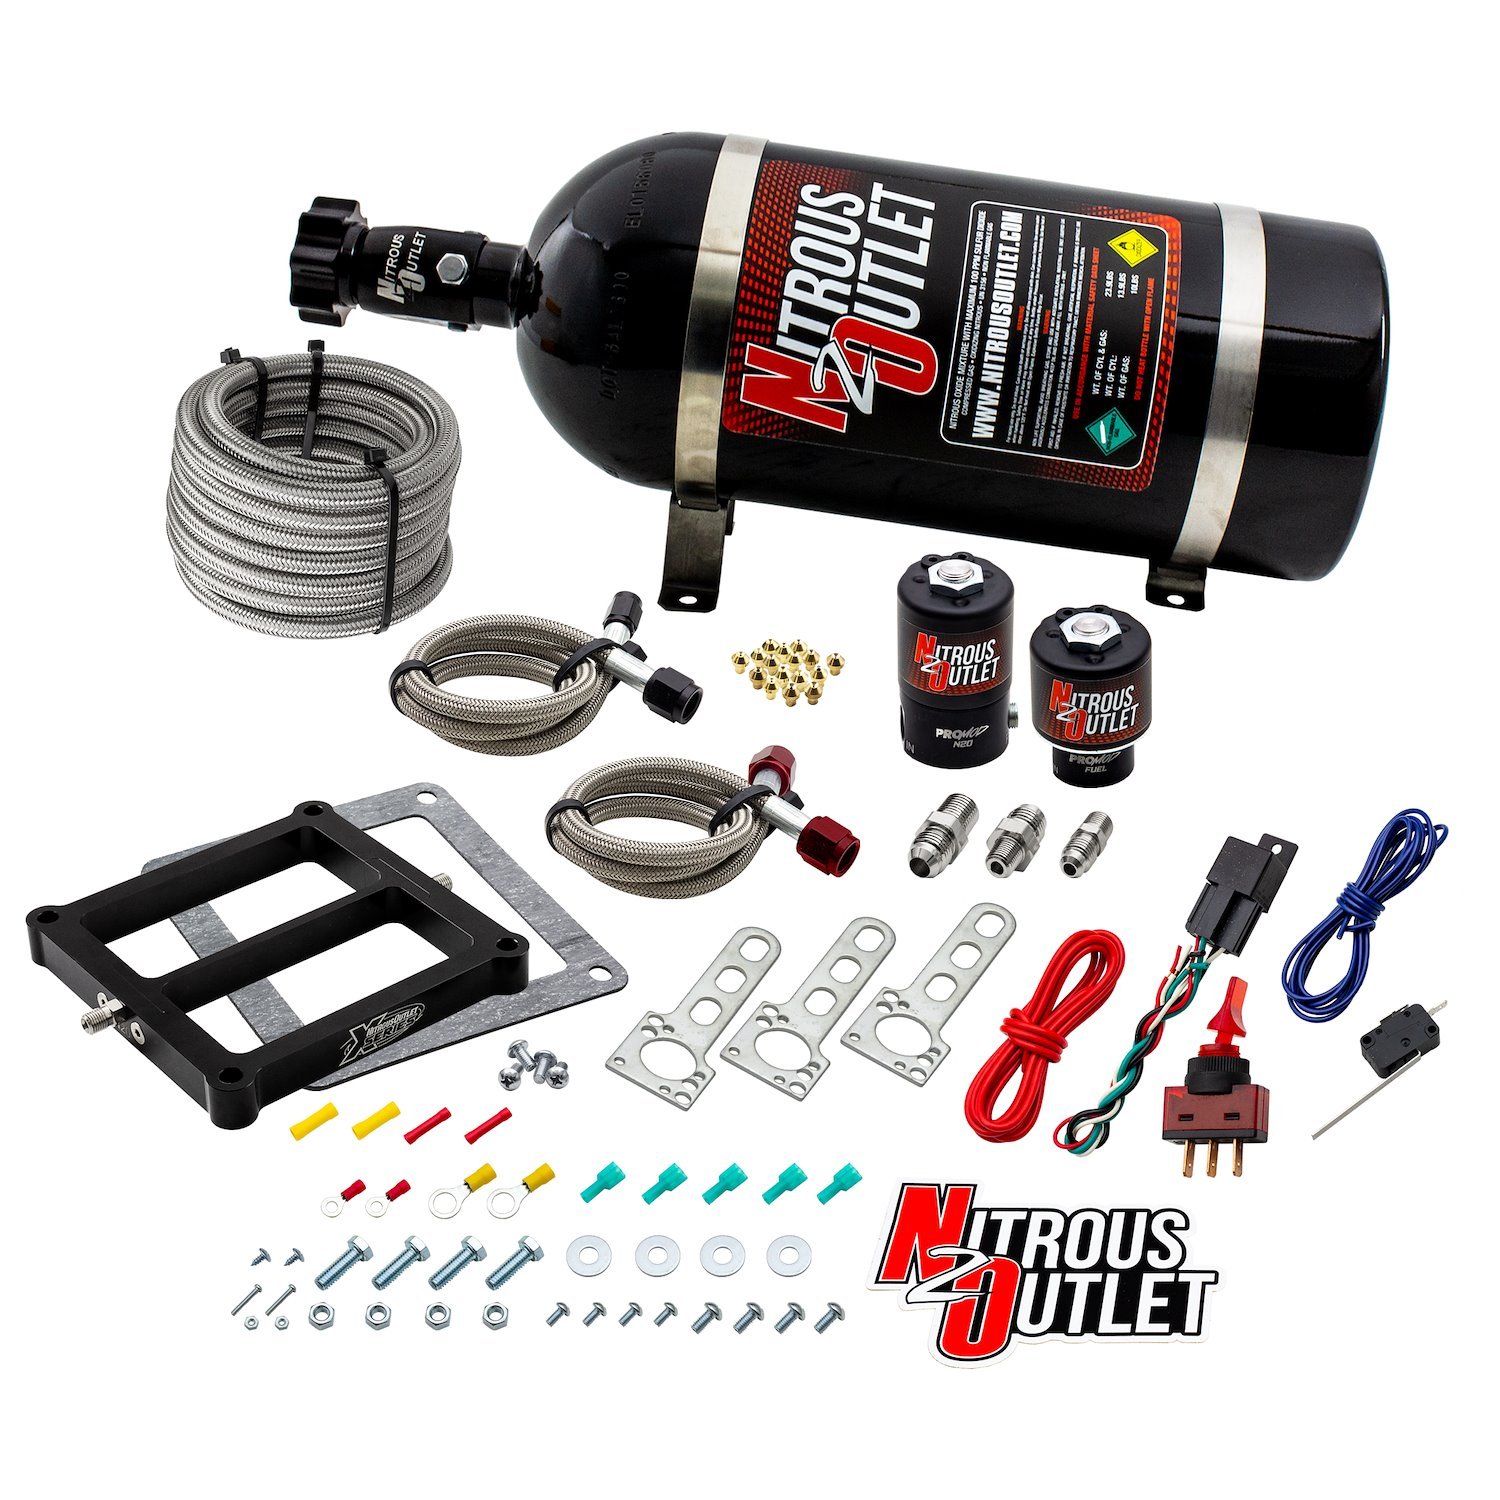 00-10071-10 Weekend Warrior 4500 Plate System, Gas/E85, 5-55psi, 100-350 HP, 10LB Bottle